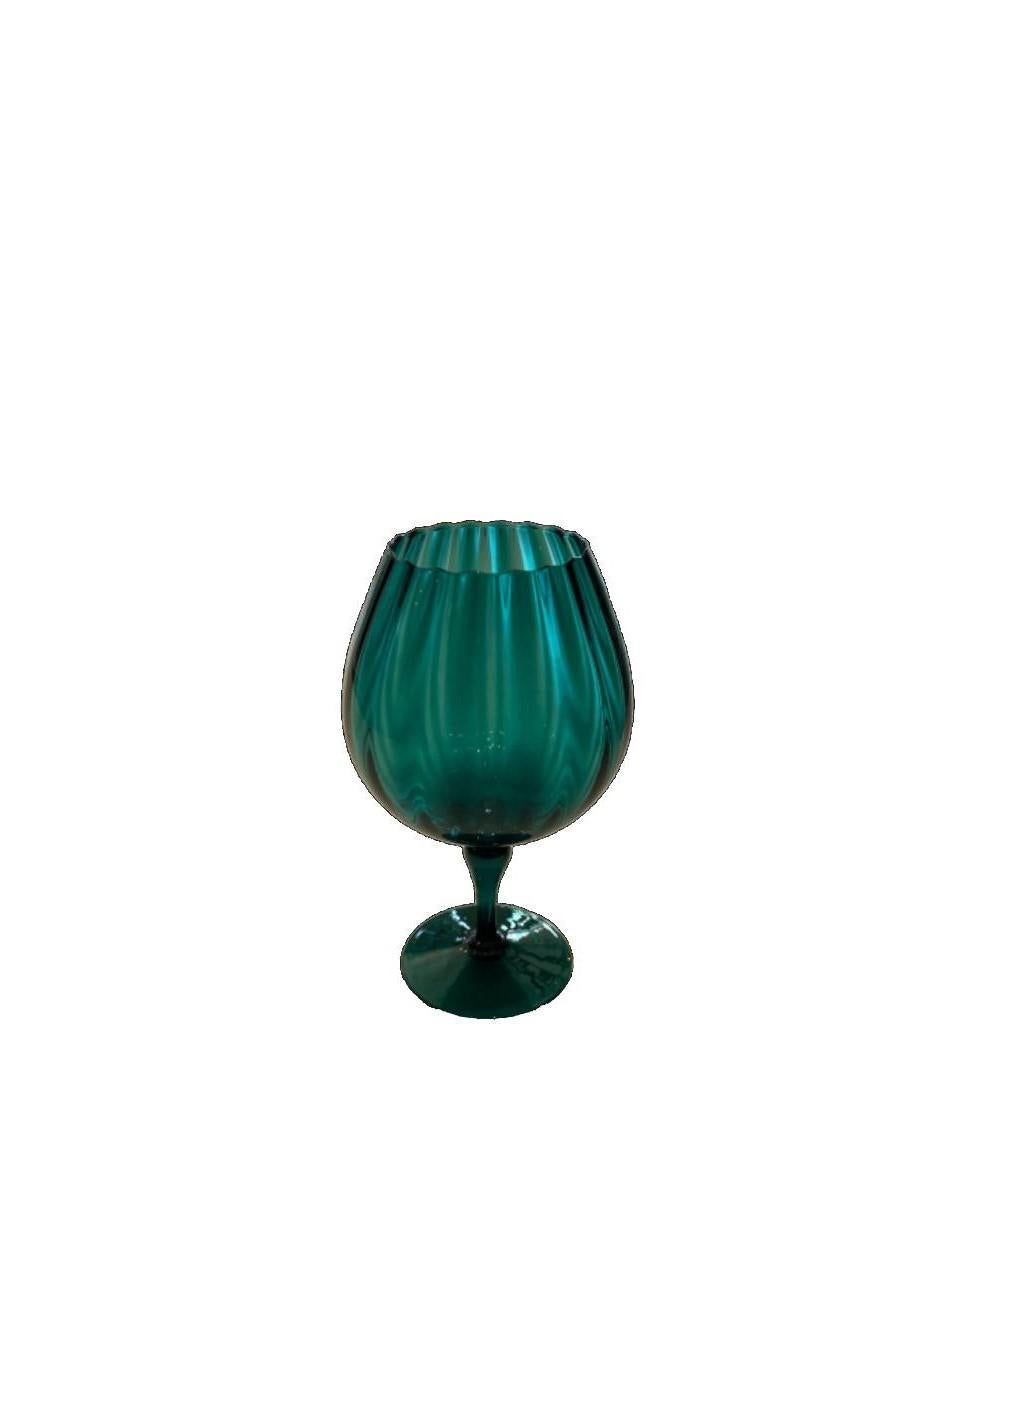 Mid-Century Modern Vintage Empoli Italy Large Teal  Glass on Foot For Sale